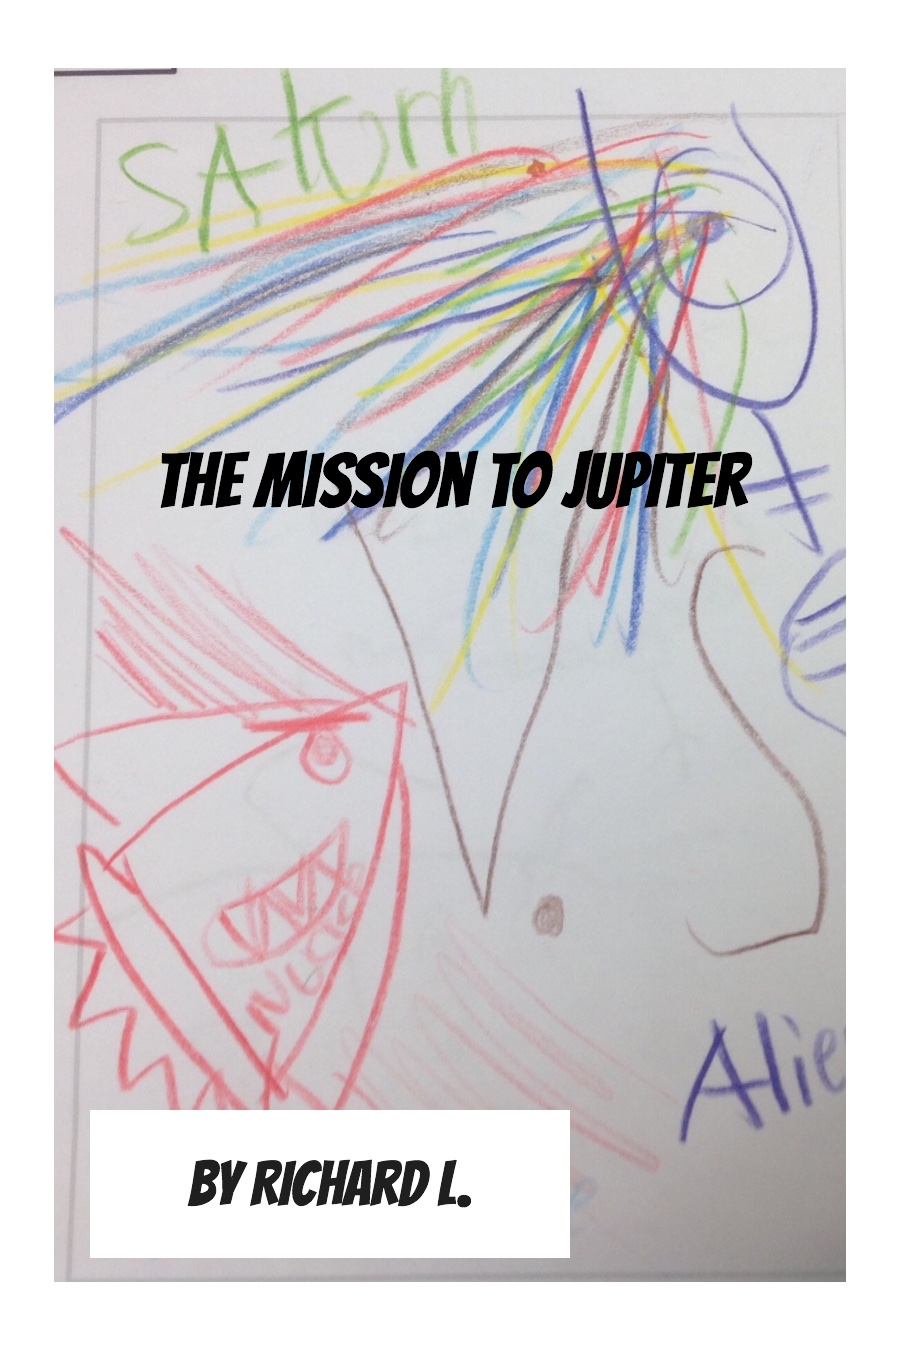 The Mission to Jupiter by Richard L (2)